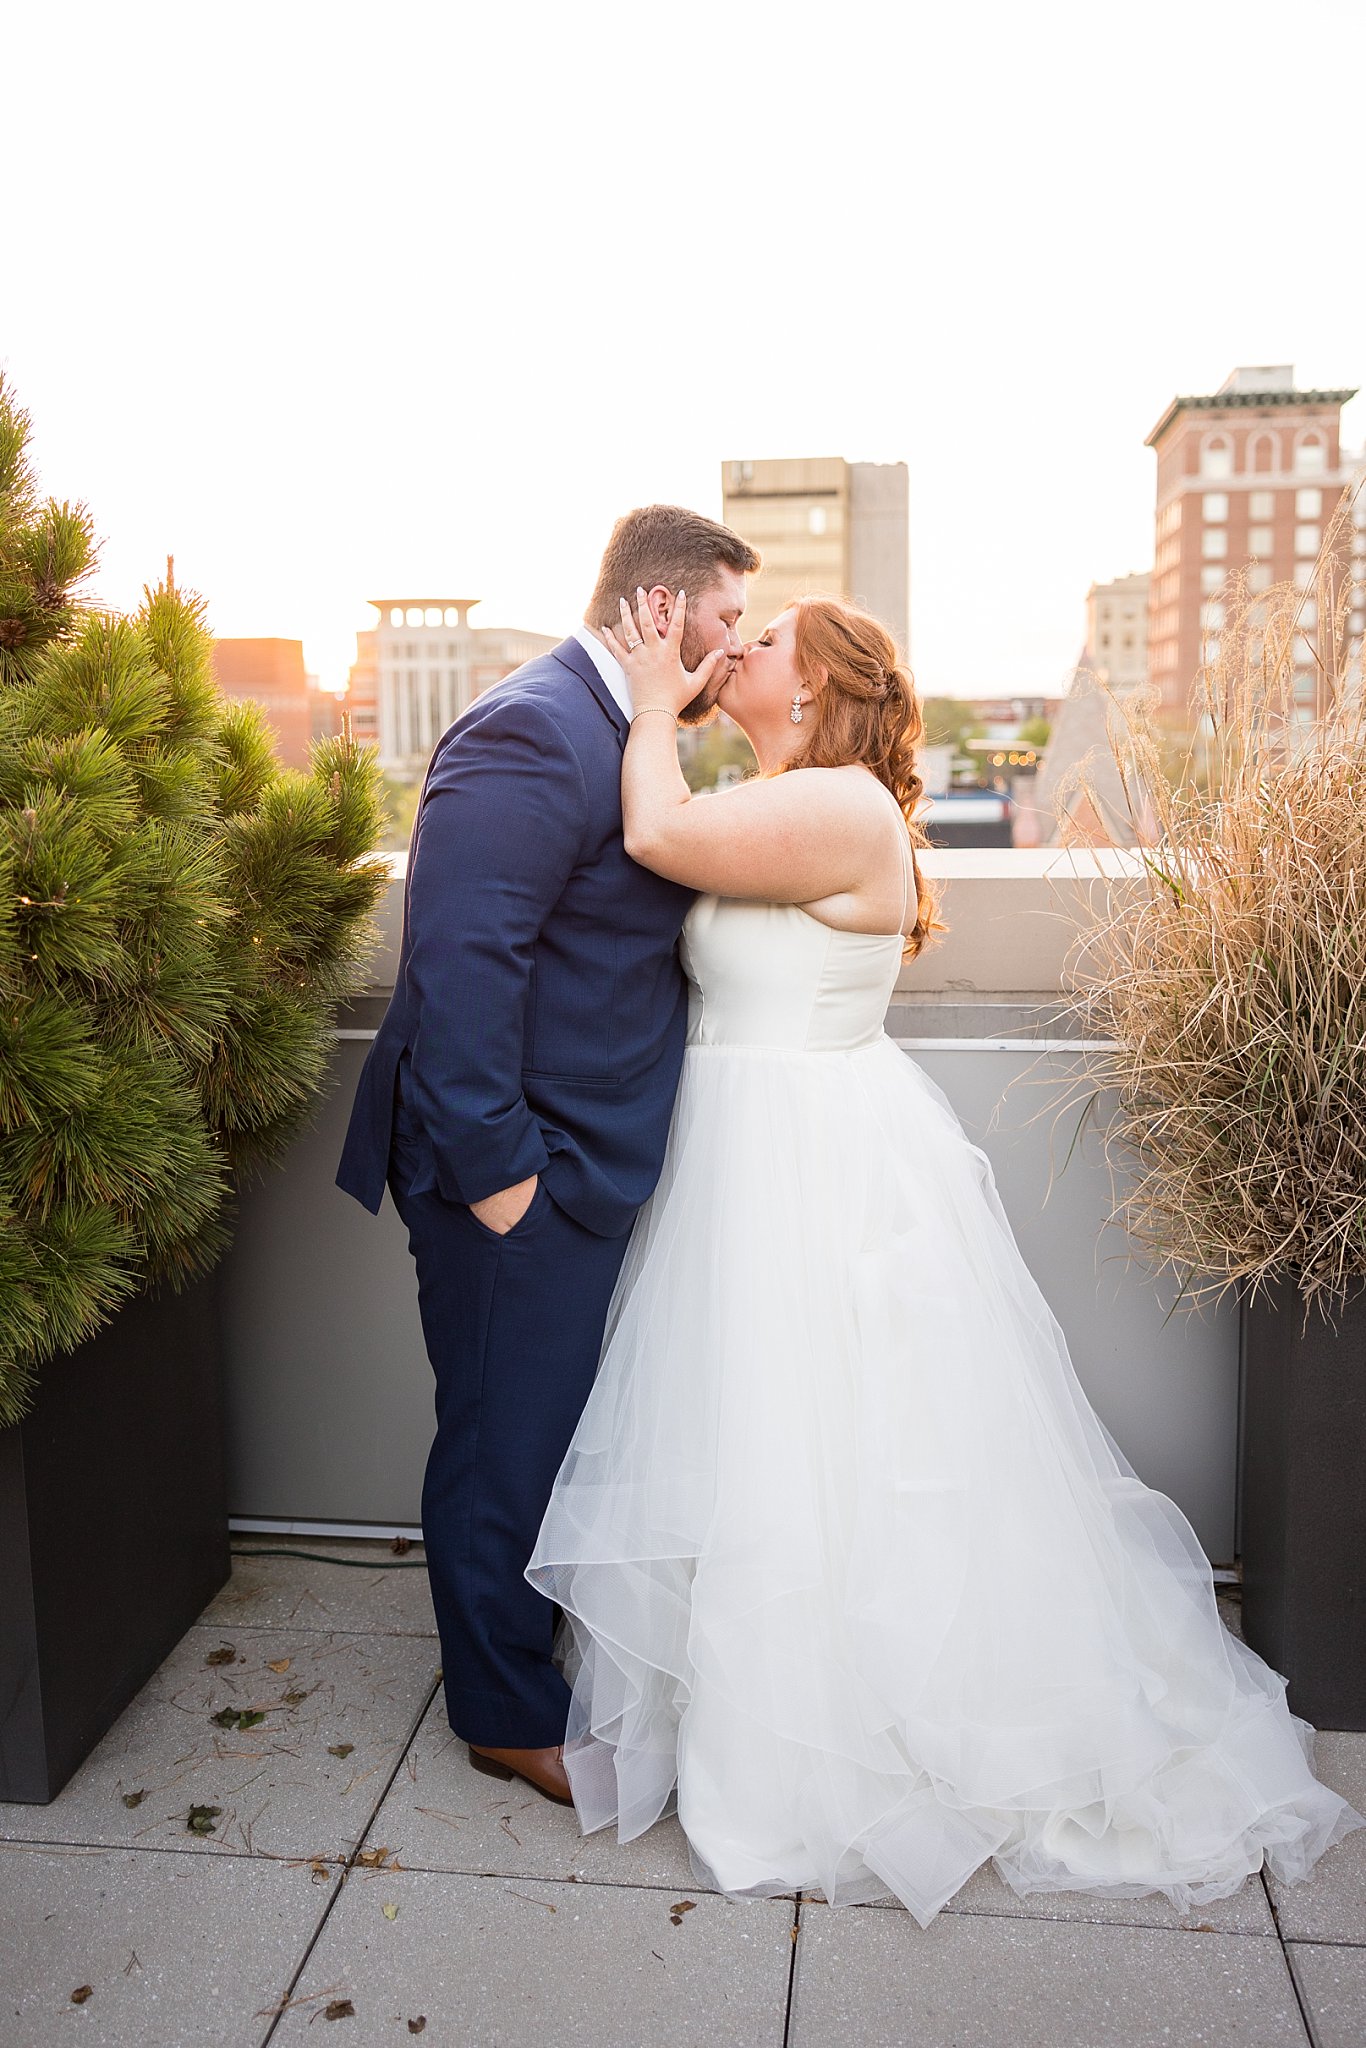 Downtown Delight: Sunset Romance for the Bride and Groom